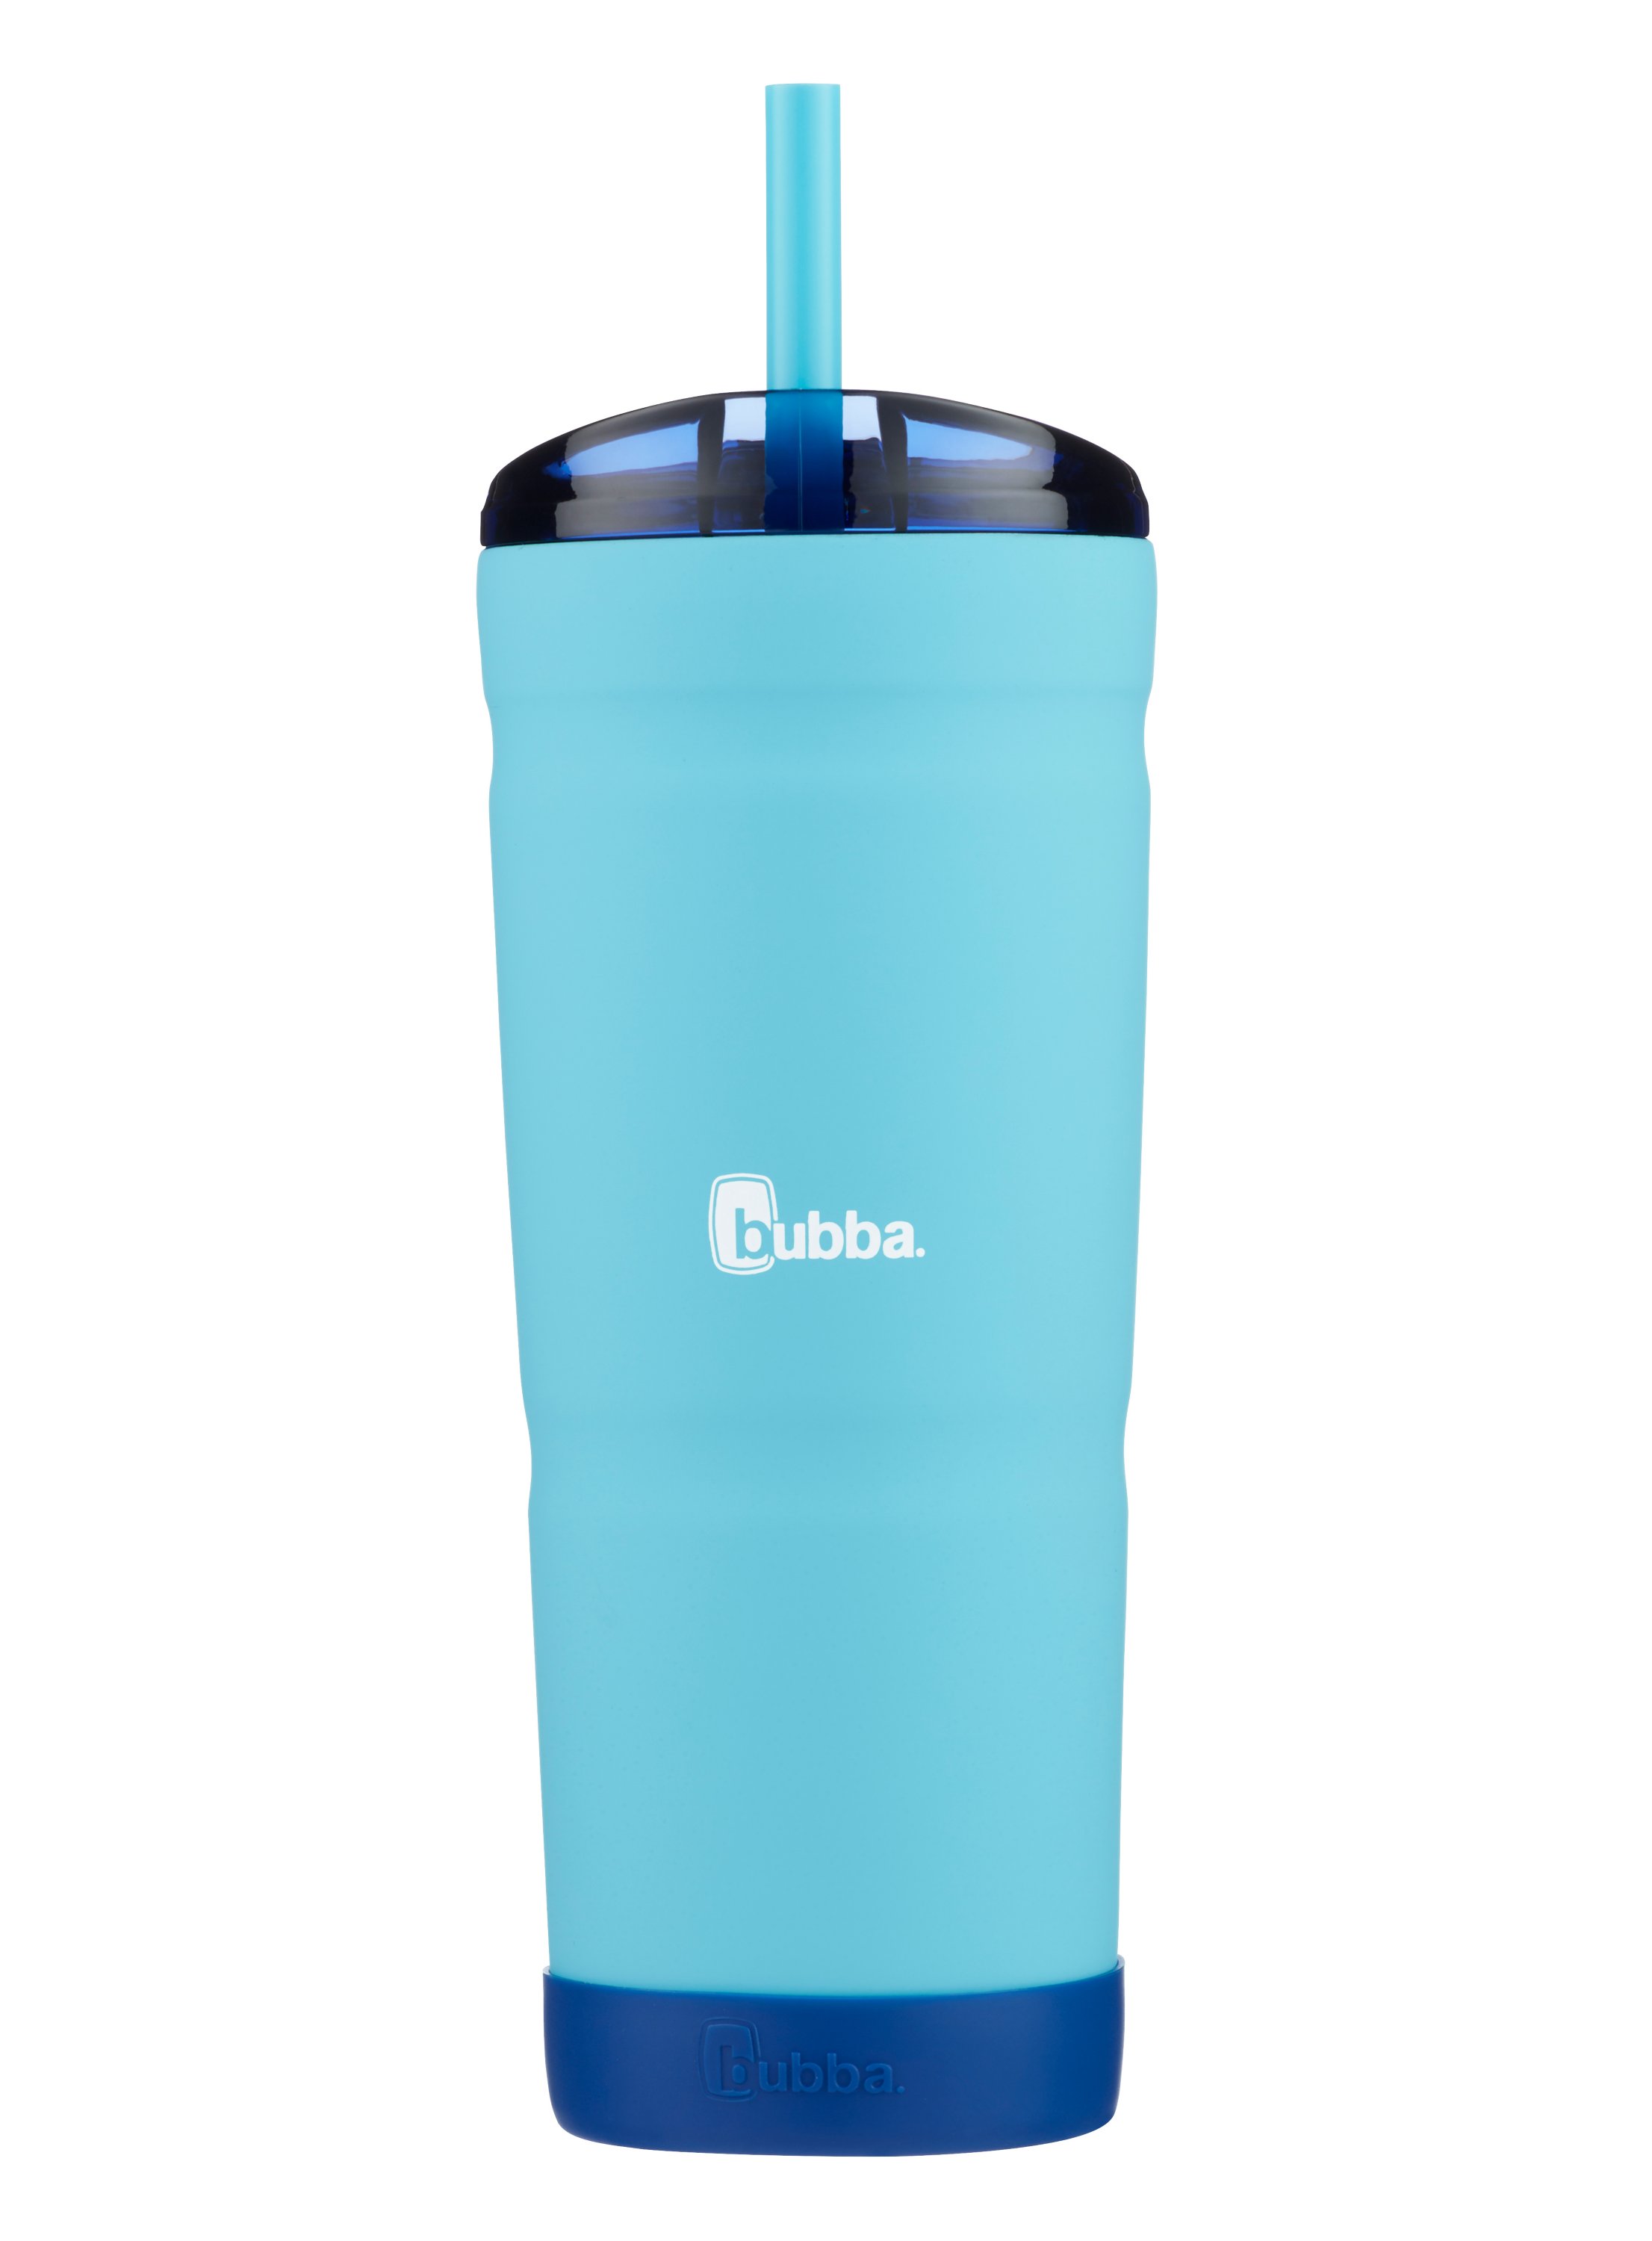 Bubba Envy S Stainless Steel Tumbler with Straw & Bumper - Pool Blue - 24 oz